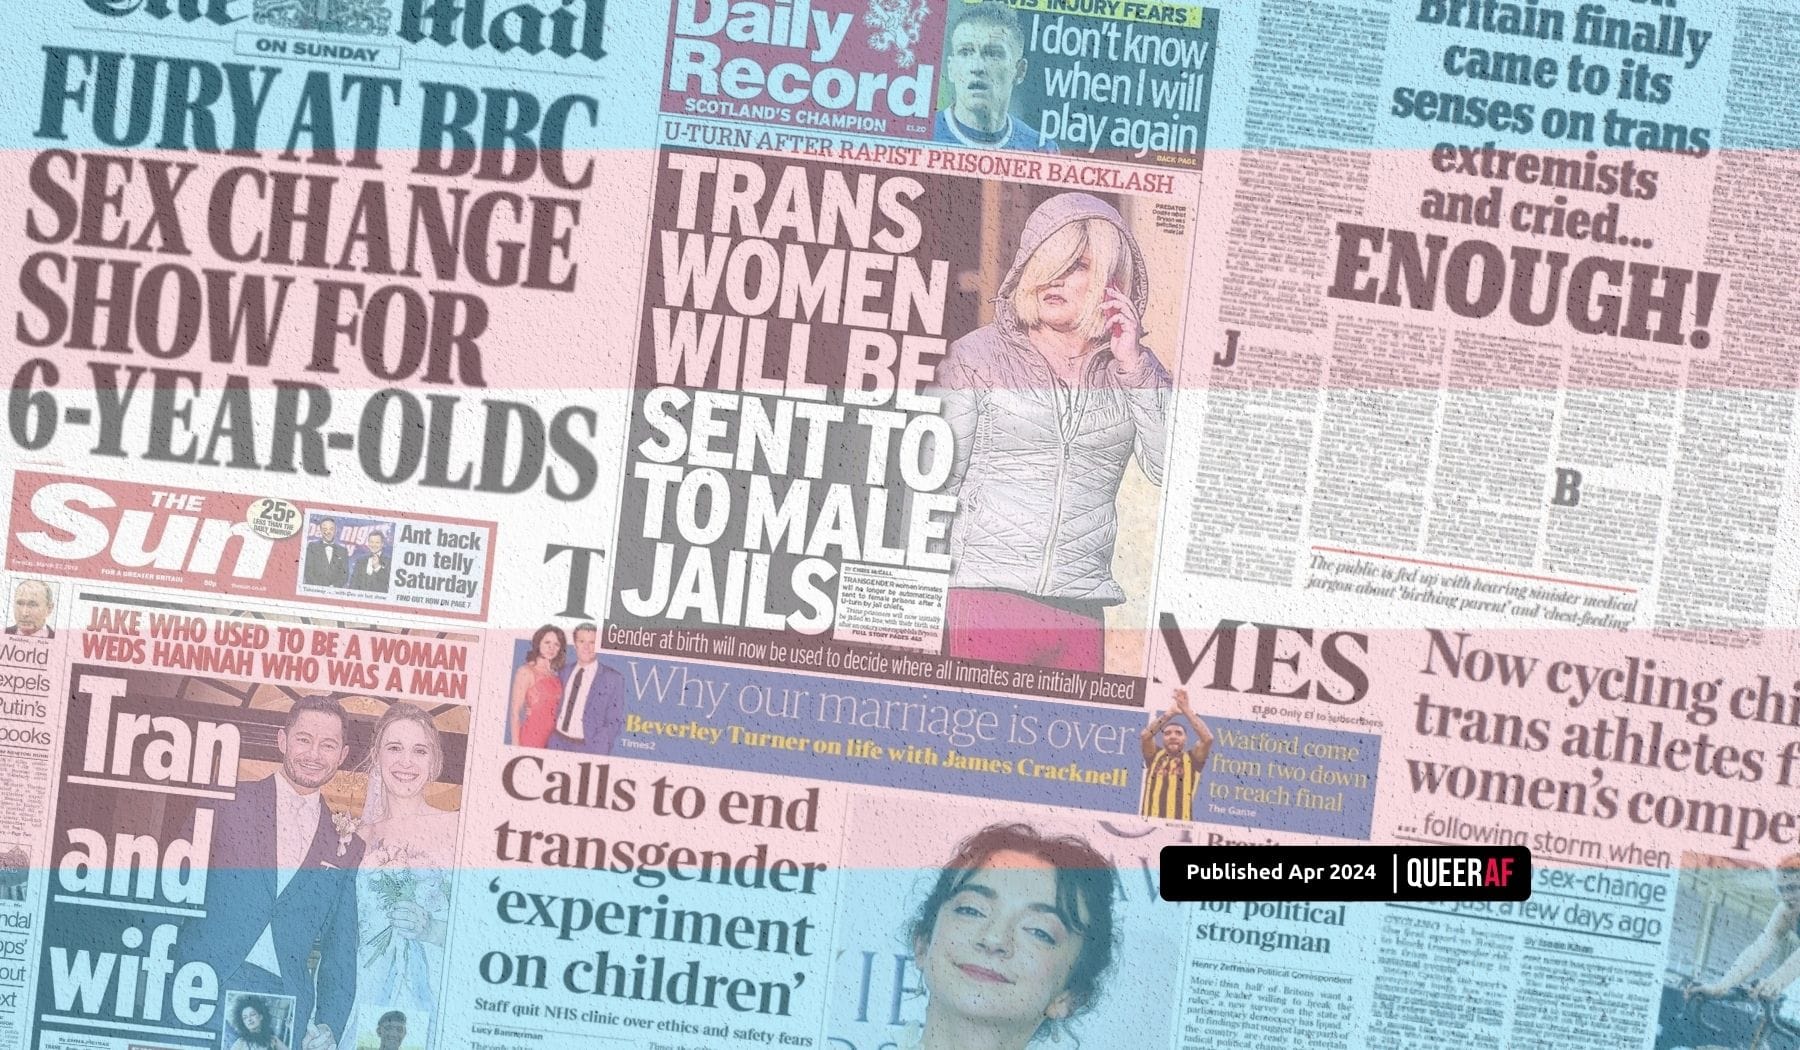 We need to prevent anti-trans misinformation from even reaching the headlines